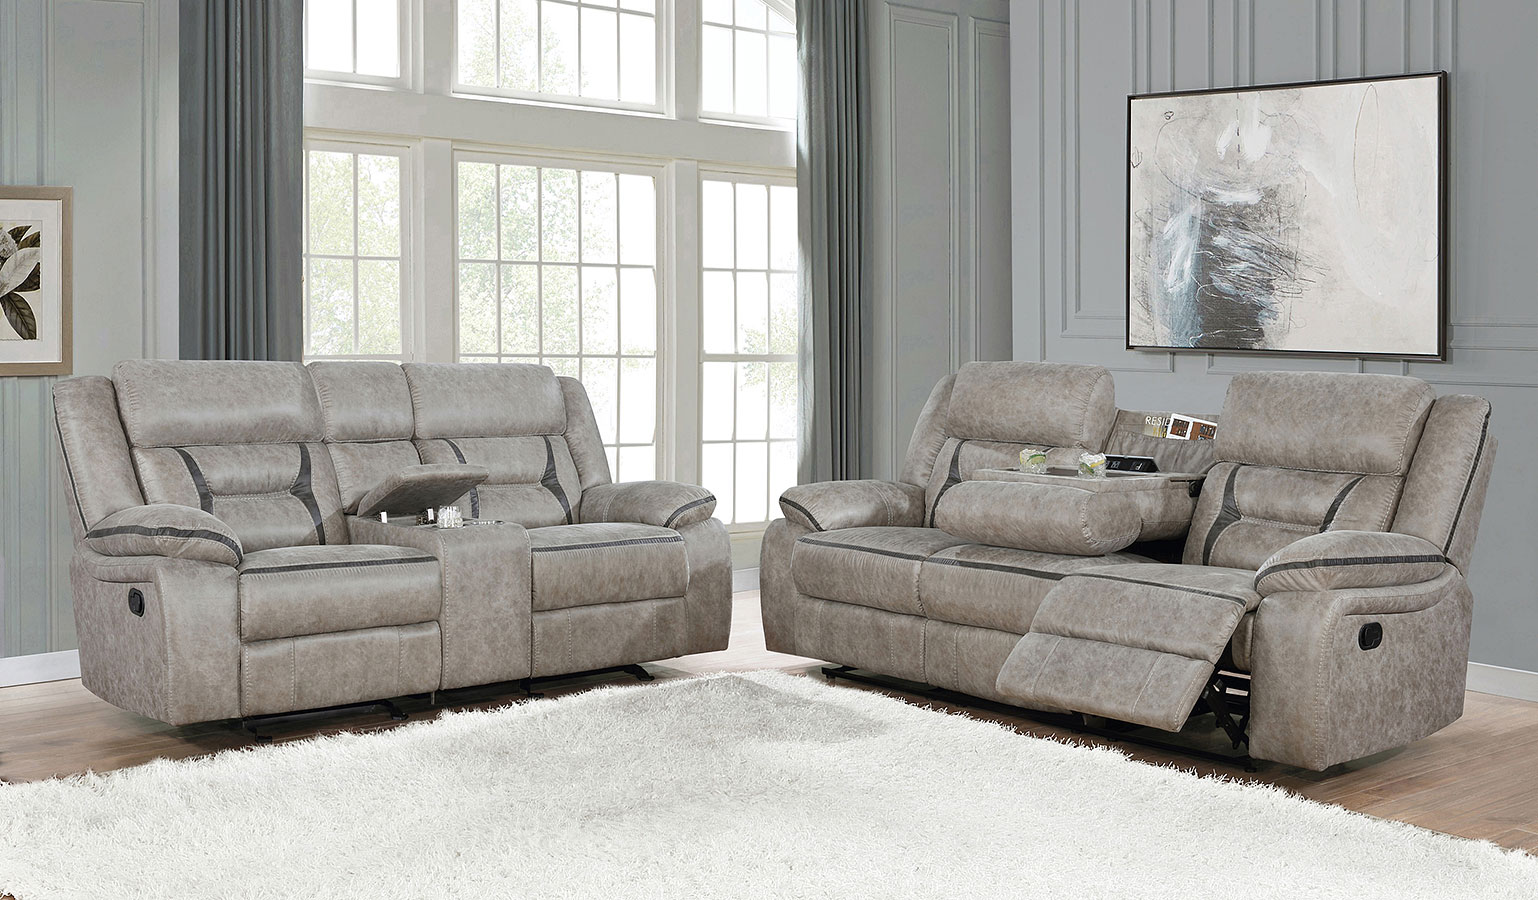 651351 Taupe Reclining Living Room Set